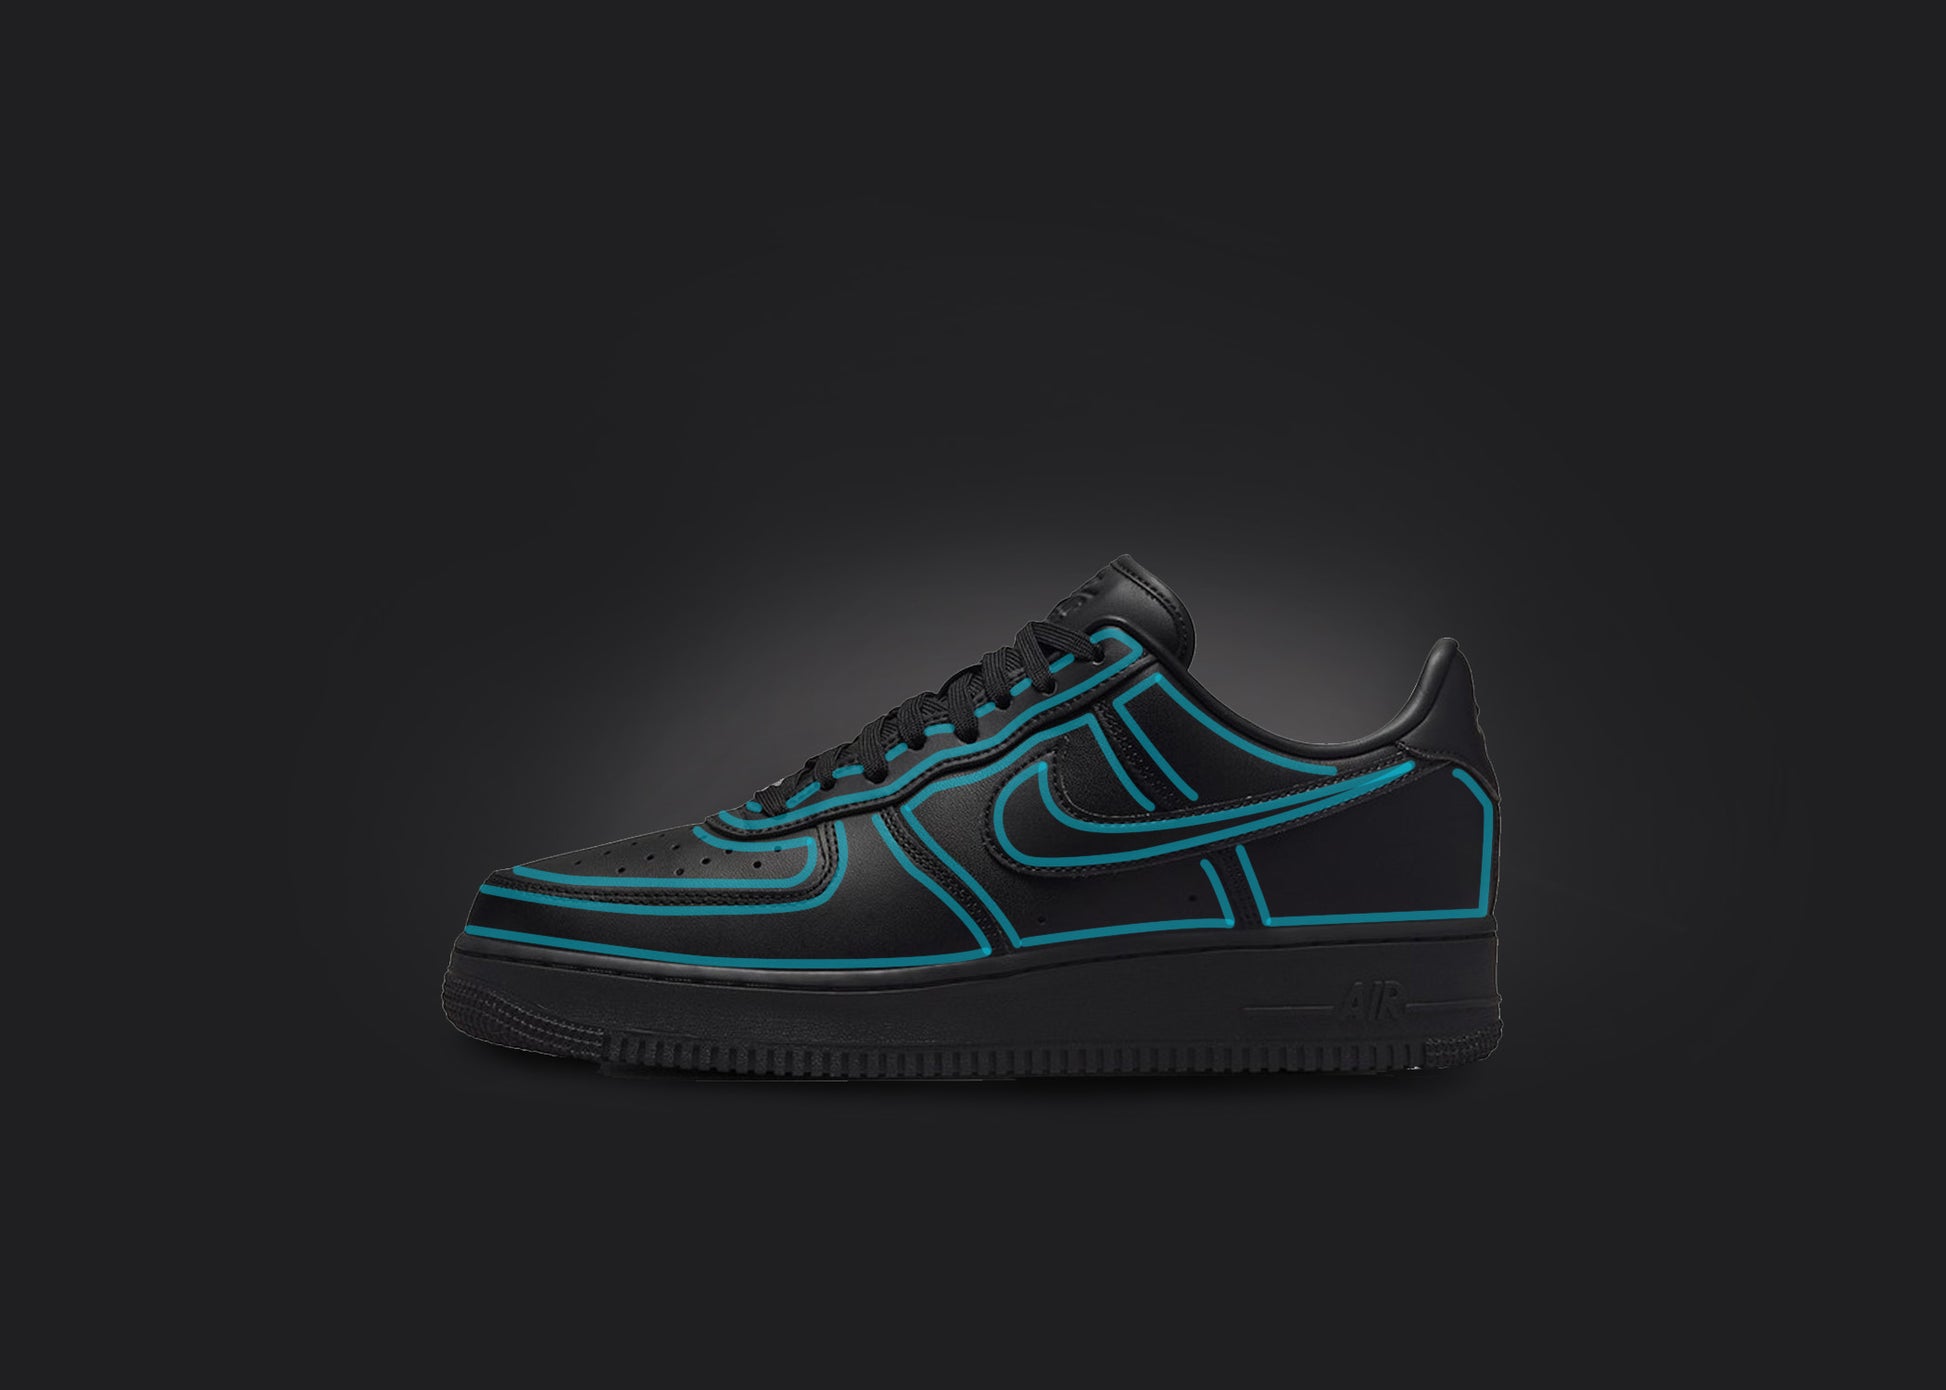 The image is featuring a custom black Air force 1 sneaker on a blank black background. The black nike sneaker has a blue cartoon outline design all over the sneaker. 